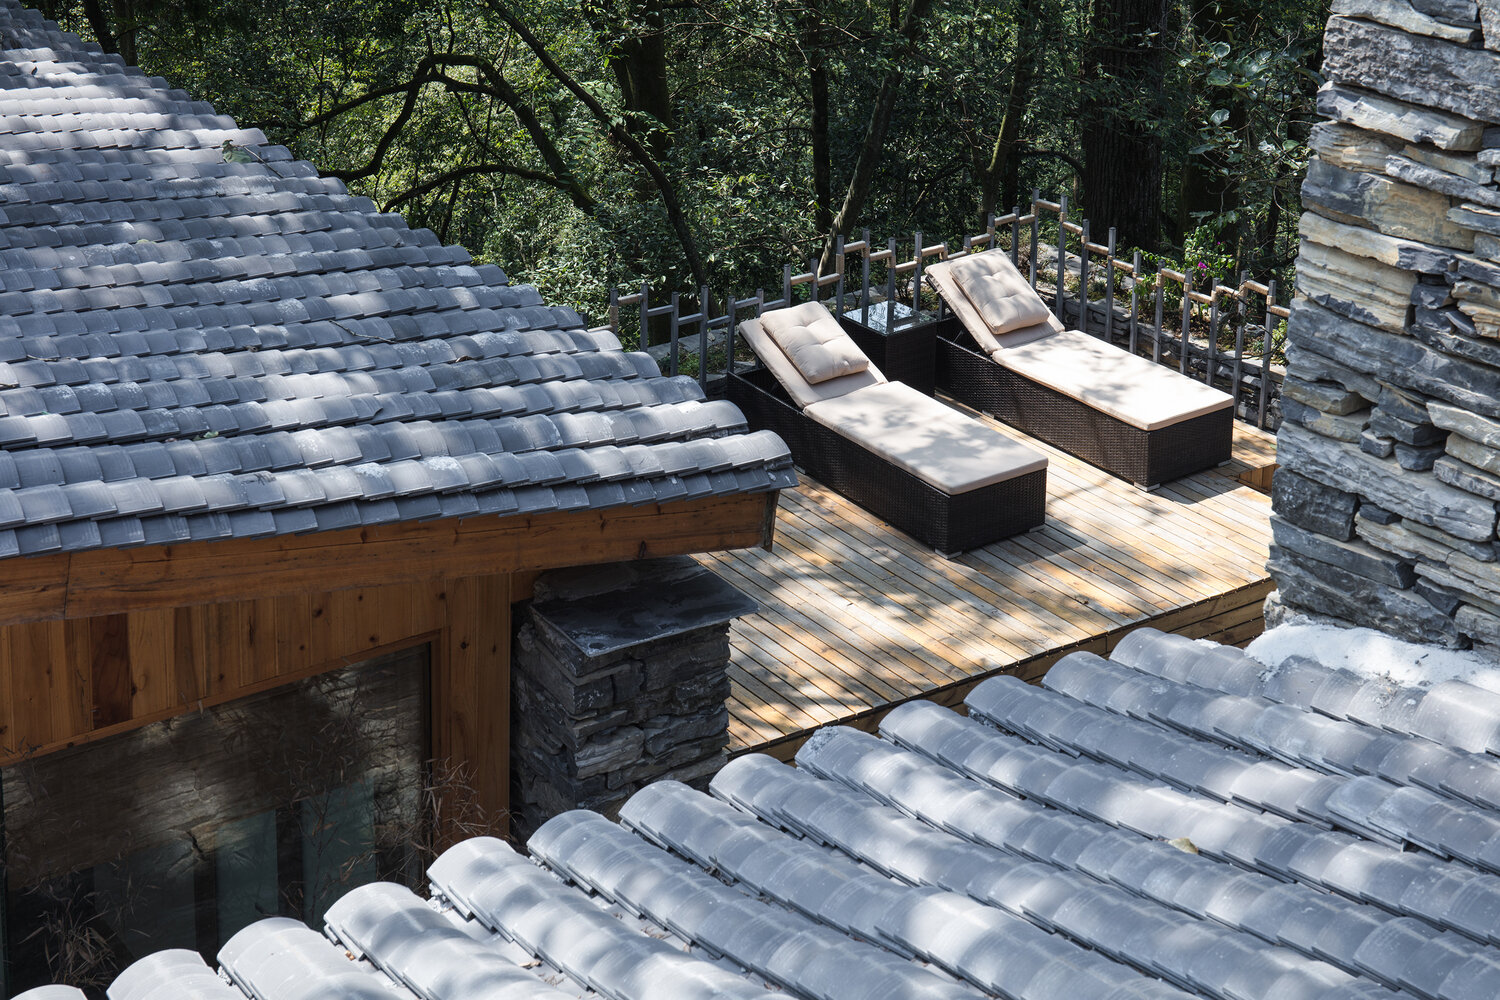 Design of the rest platform for the guest rooms of lahao stone house in Fenghuang ancient city of Hunan Province